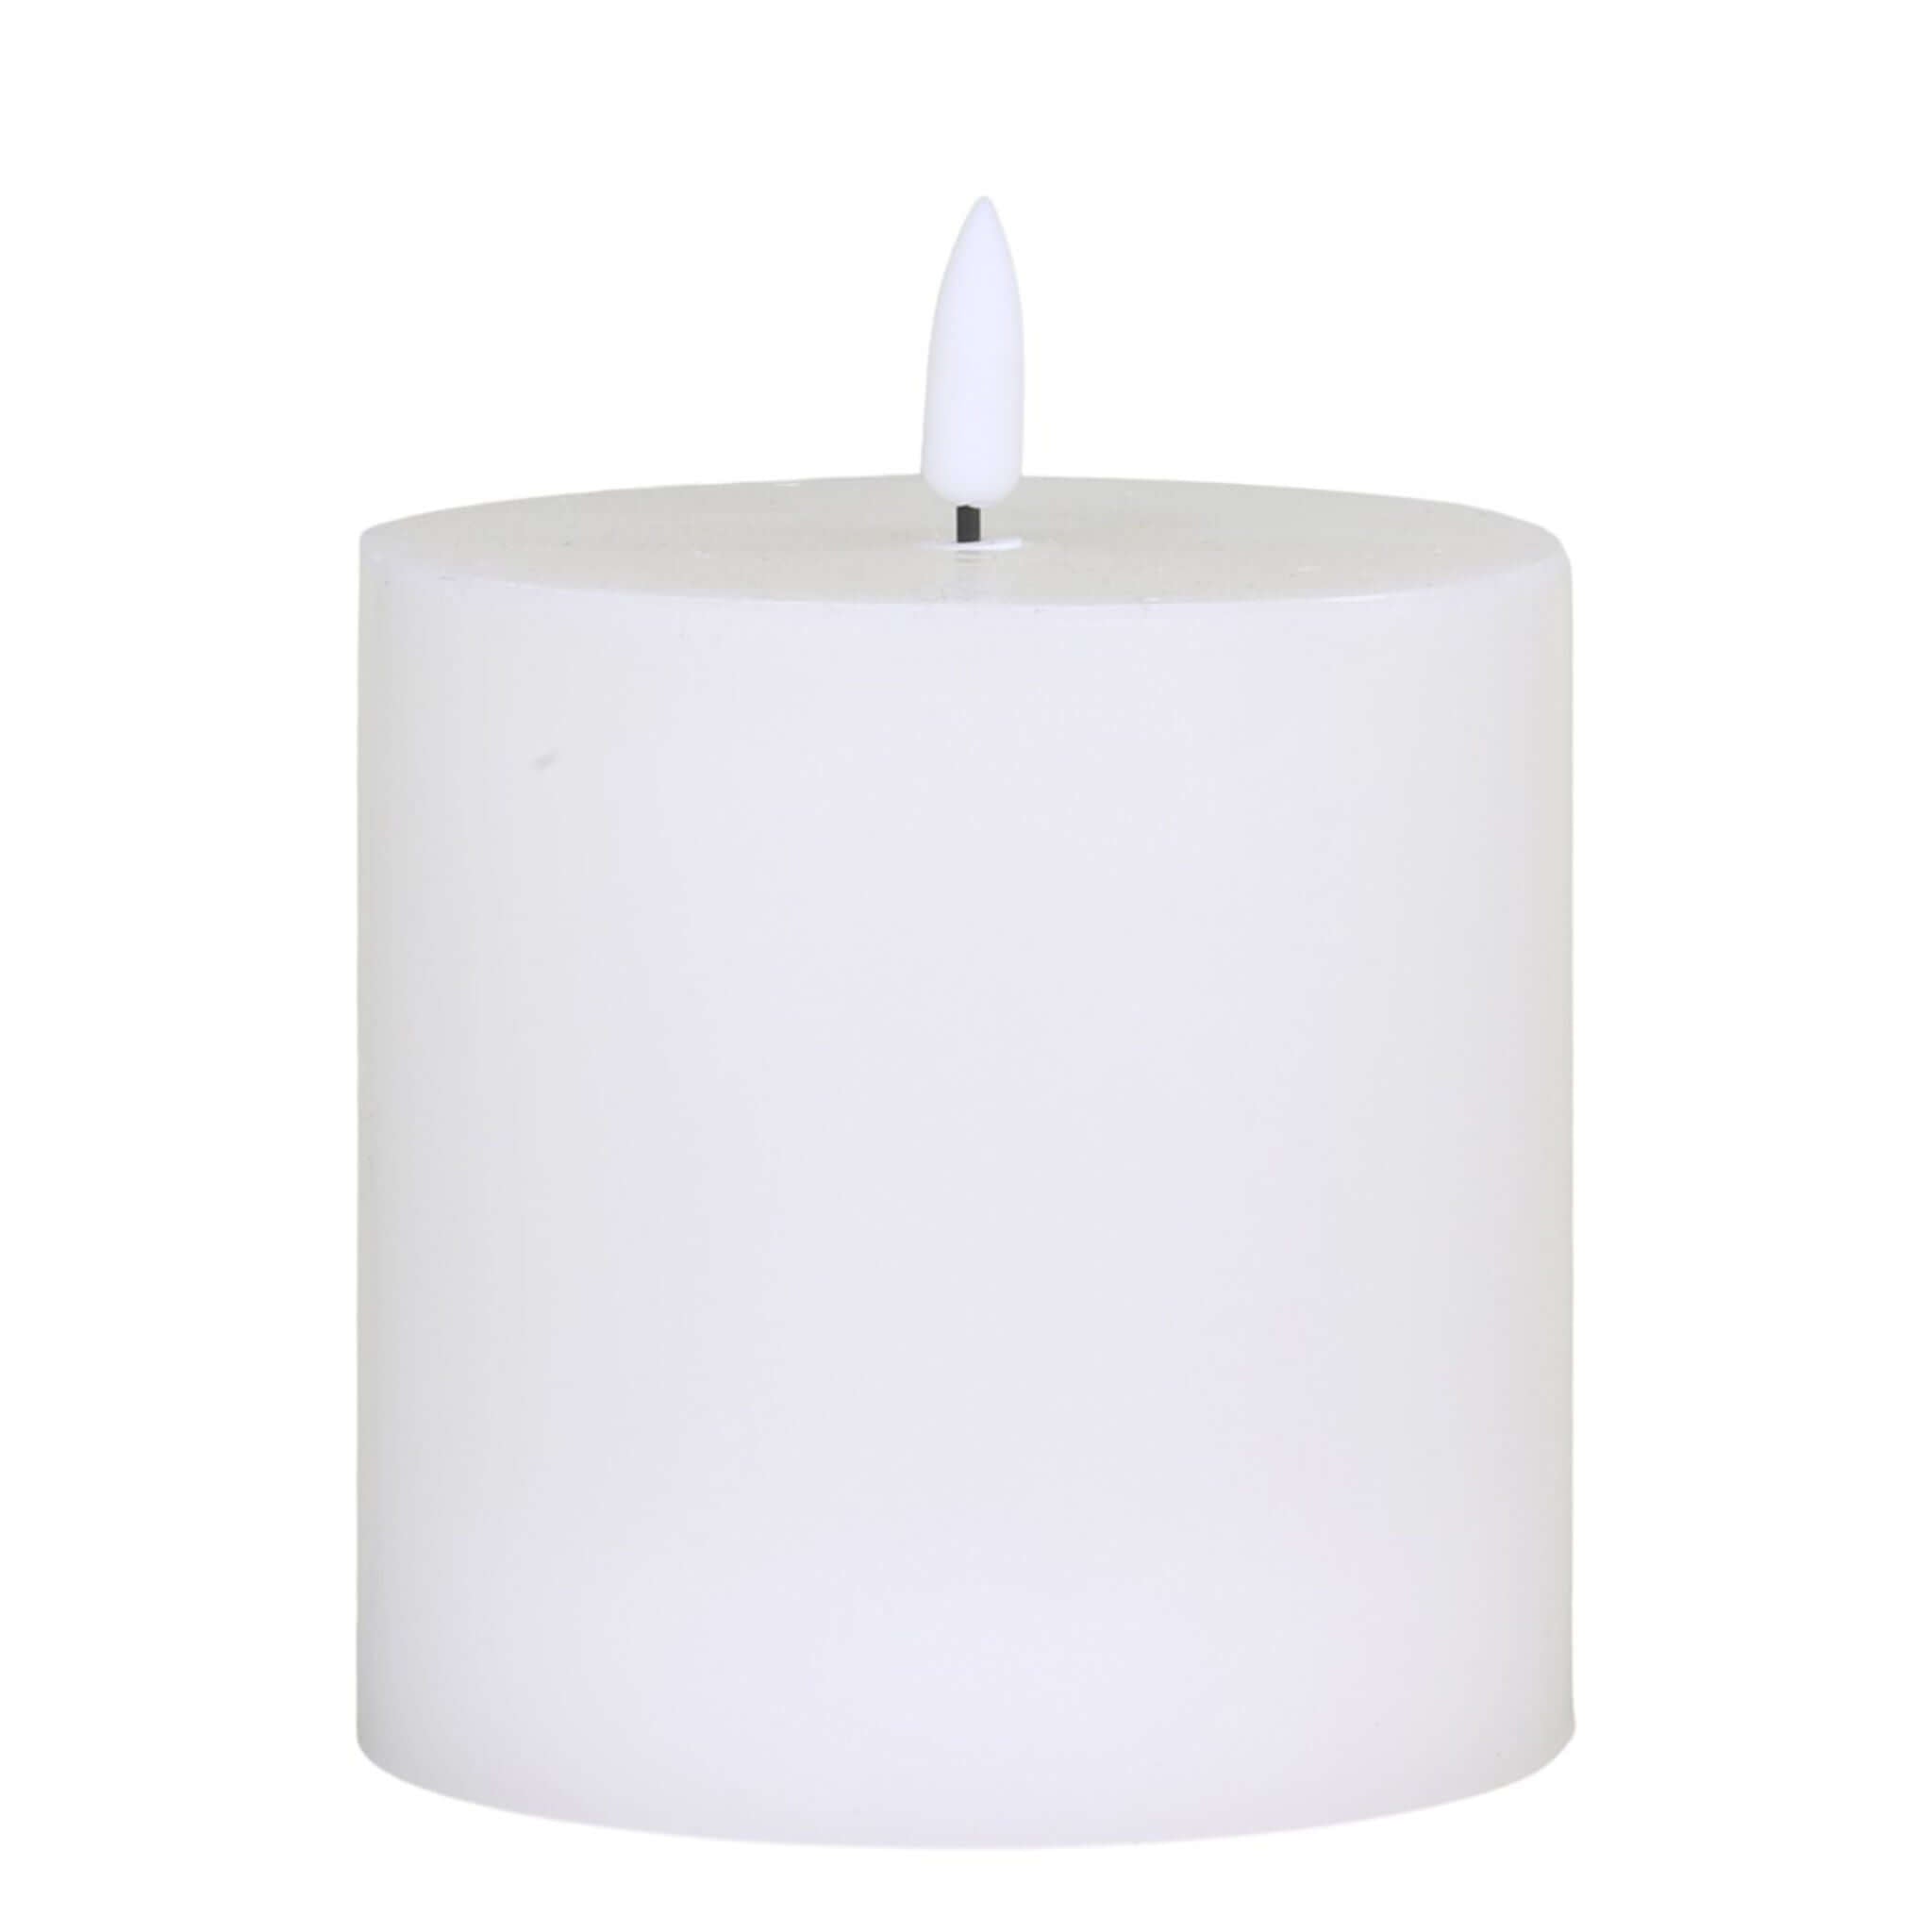 Battery-Operated Wax Flameless LED Pillar Candles - escapologyhome.co.uk